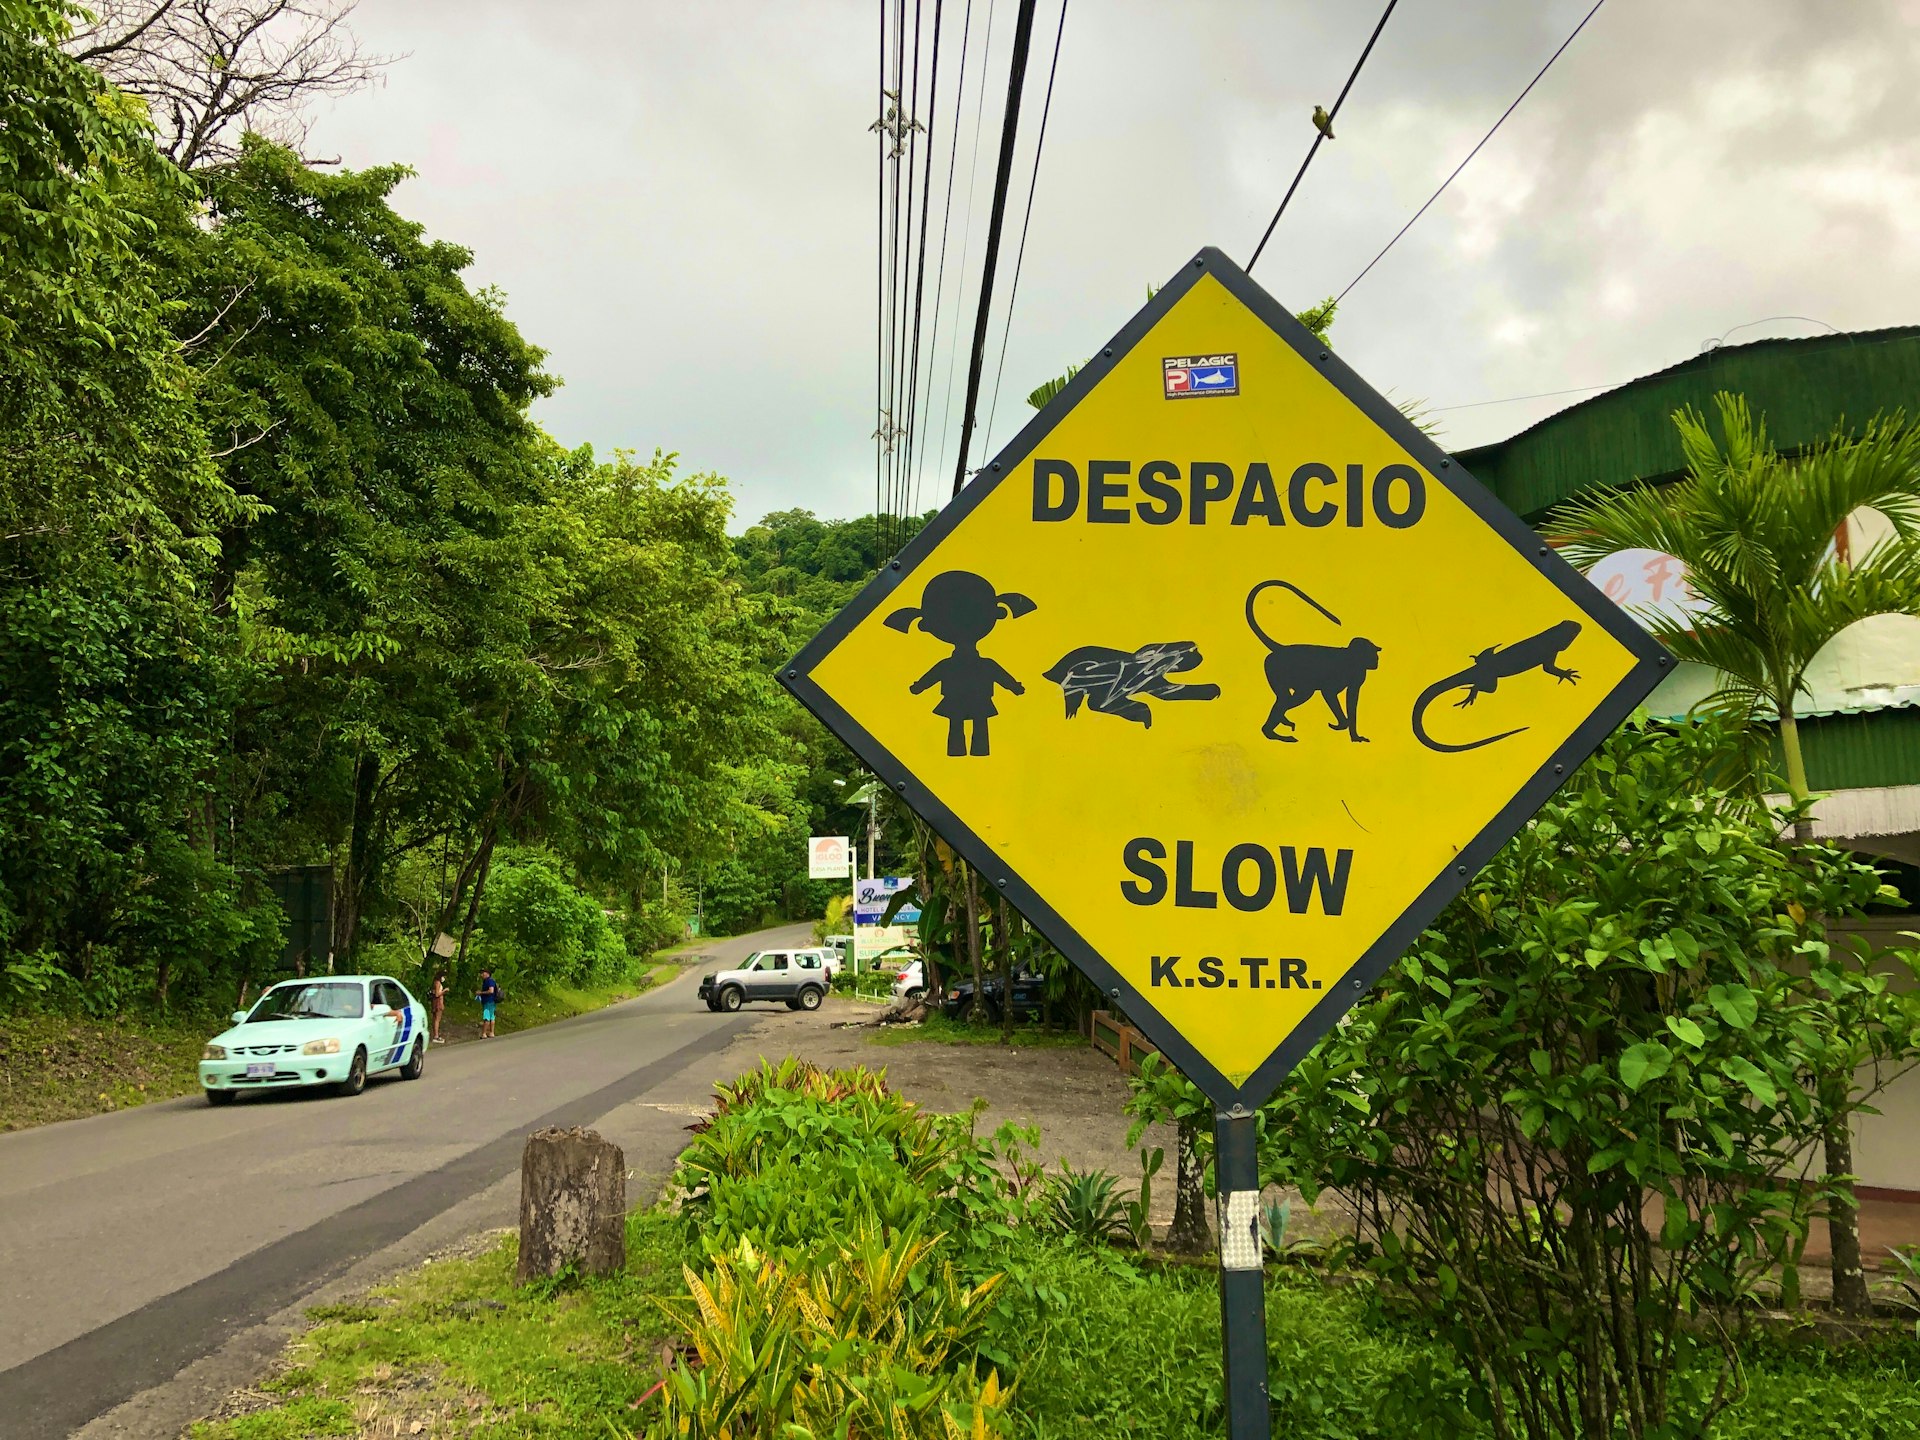 A tree-lined road with a diamond-shaped, yellow sign cautioning motorists to slow down for children and wildlife  